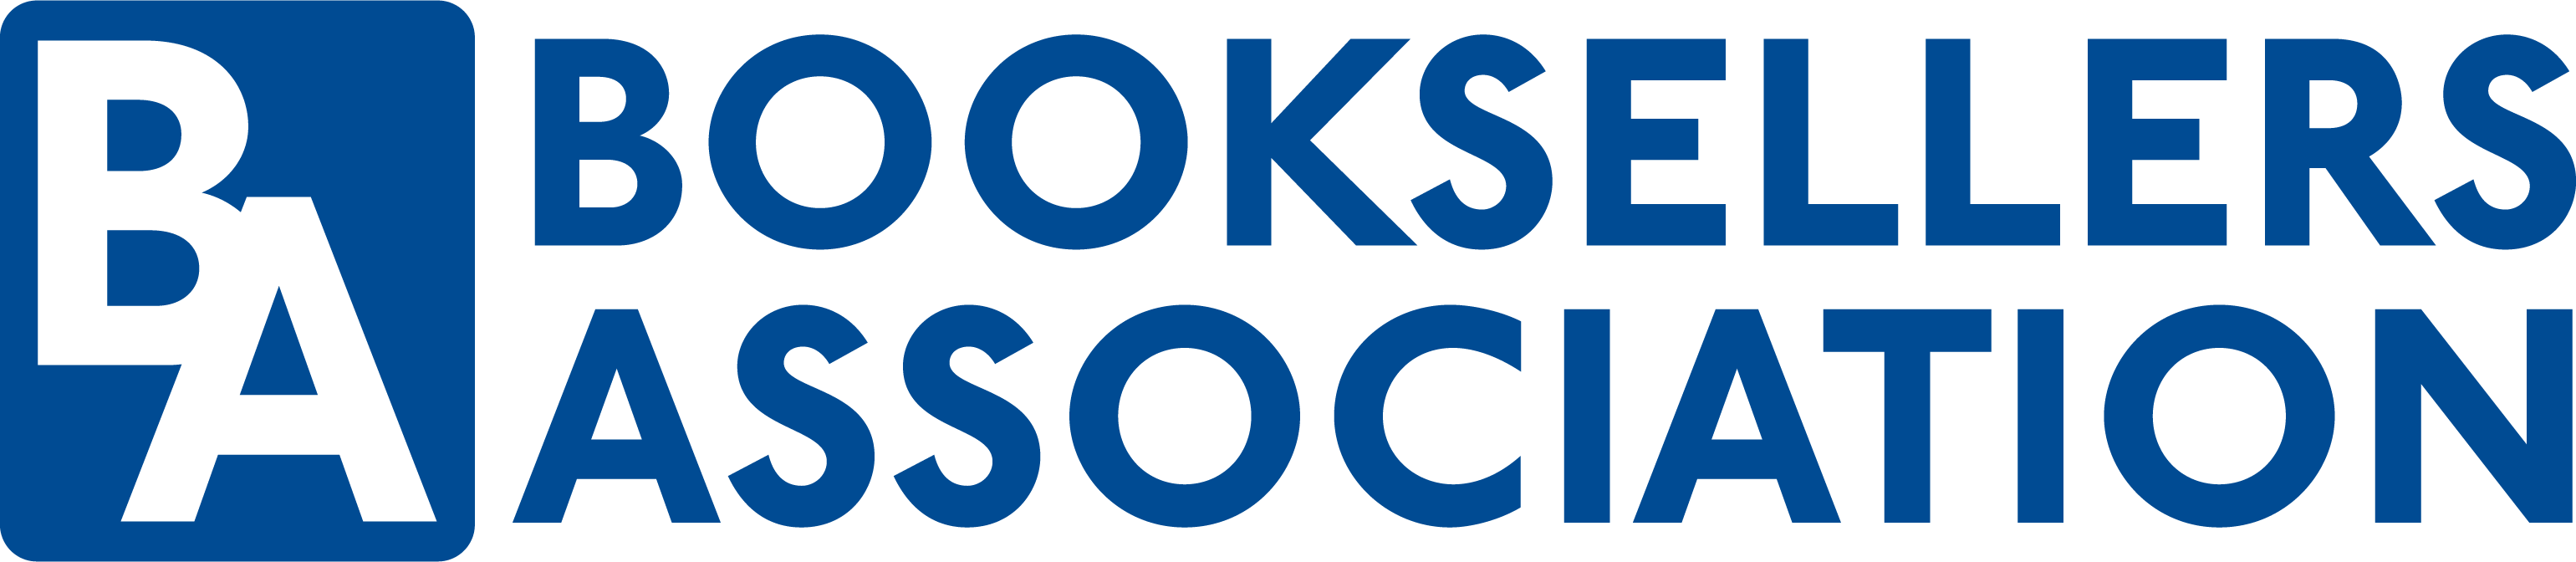 Booksellers Association